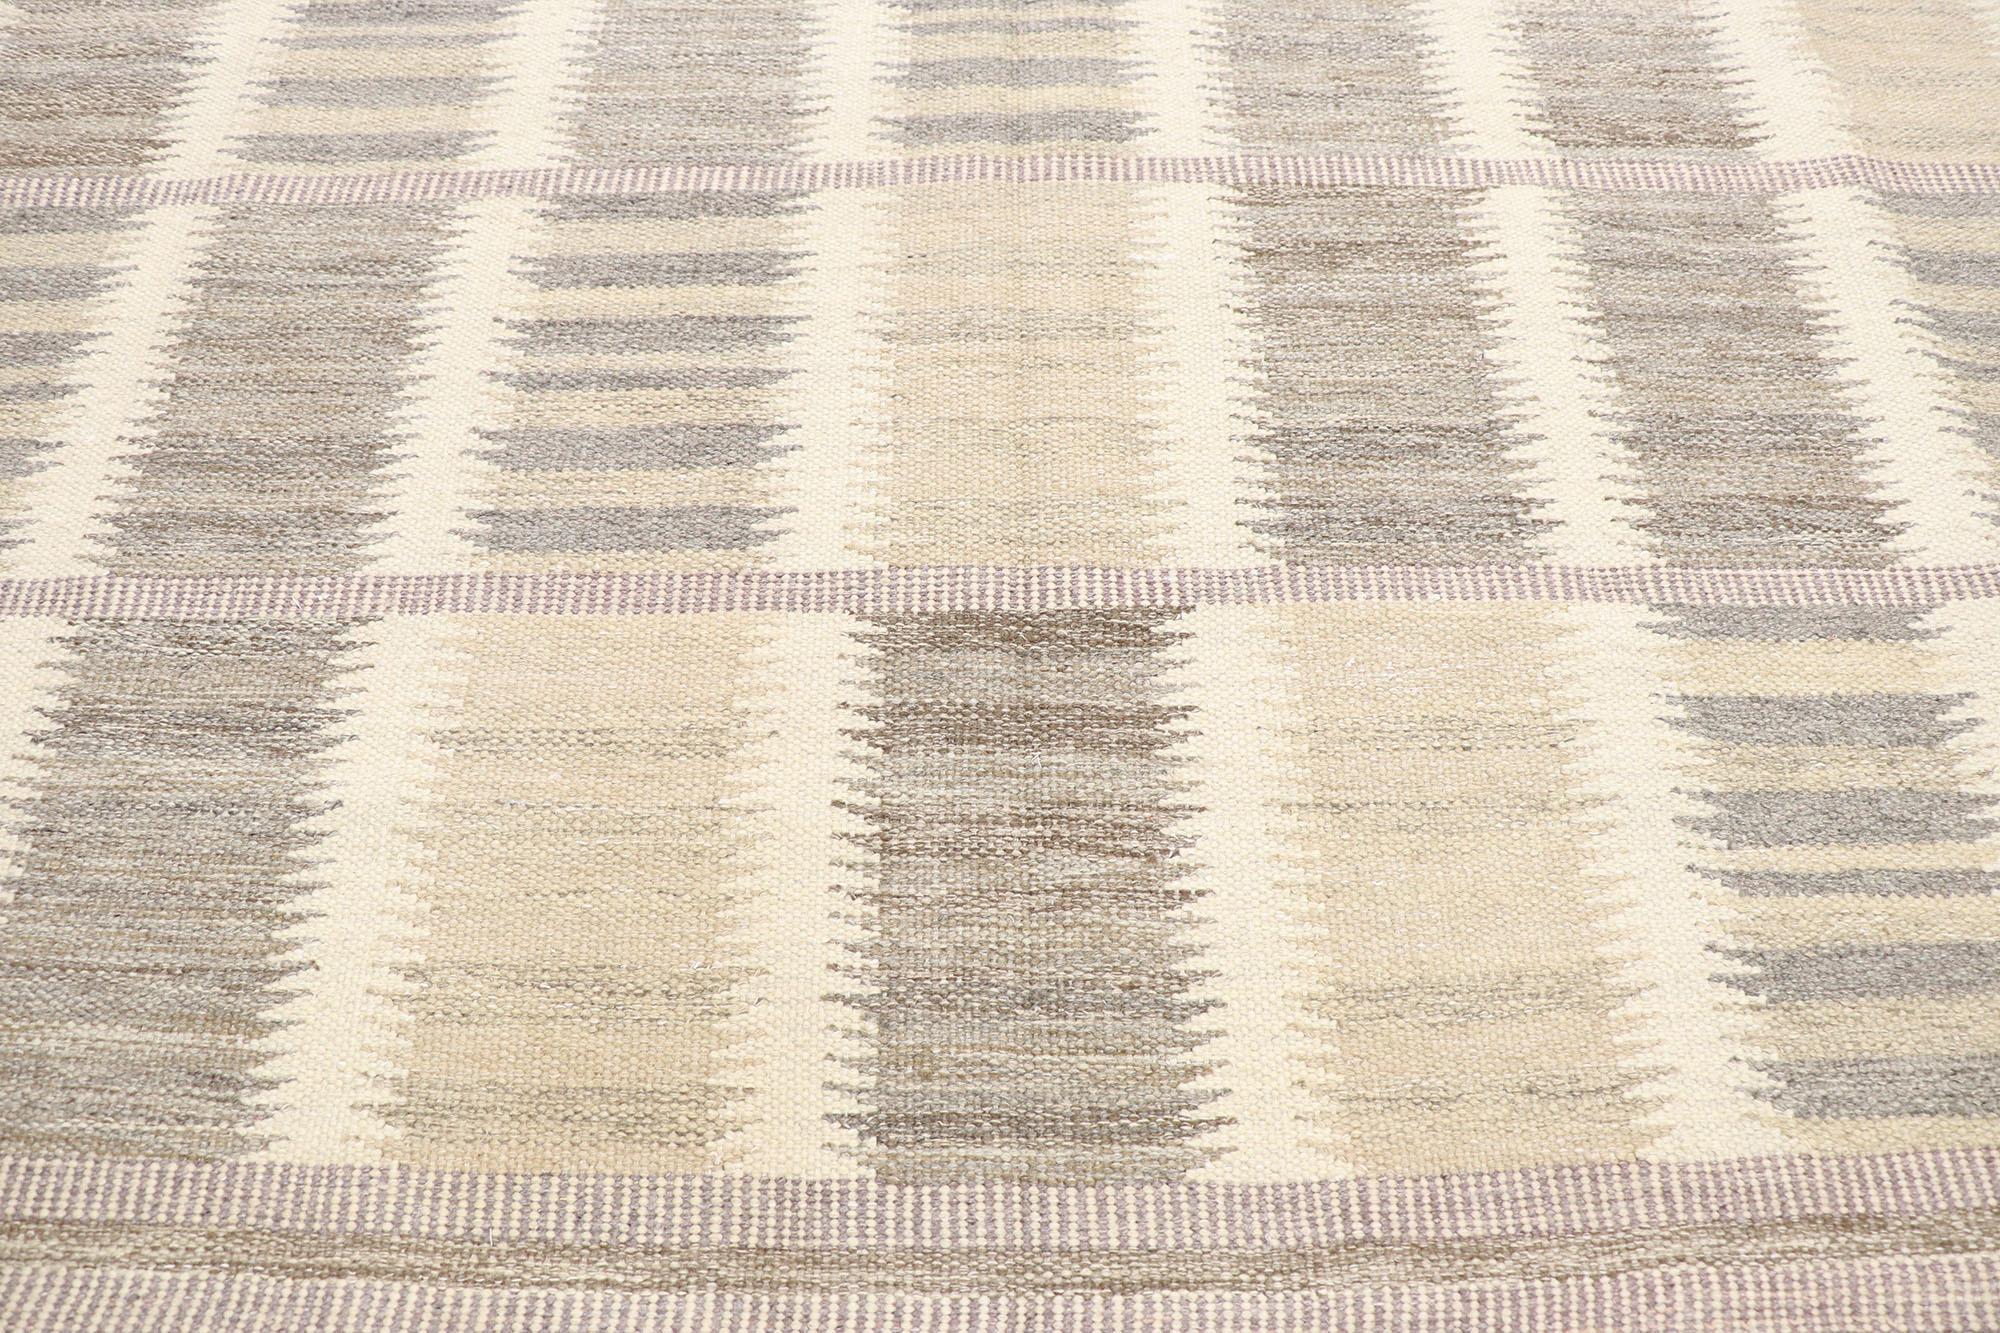 Hand-Woven New Contemporary Swedish Inspired Kilim Rug with Scandinavian Modern Style